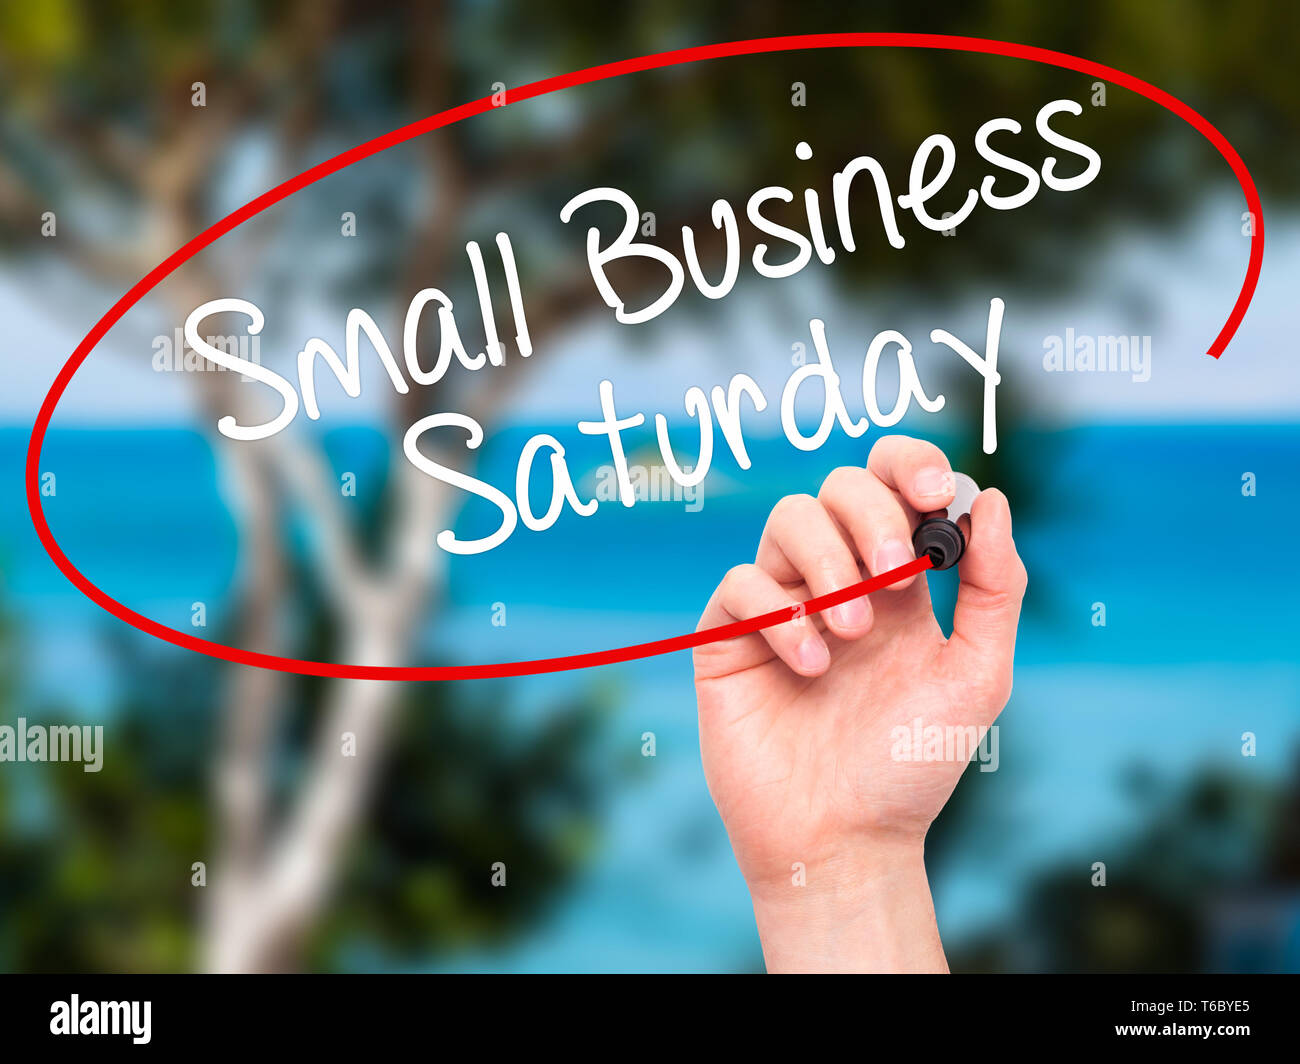 Man Hand writing Small Business Saturday with black marker on visual screen Stock Photo